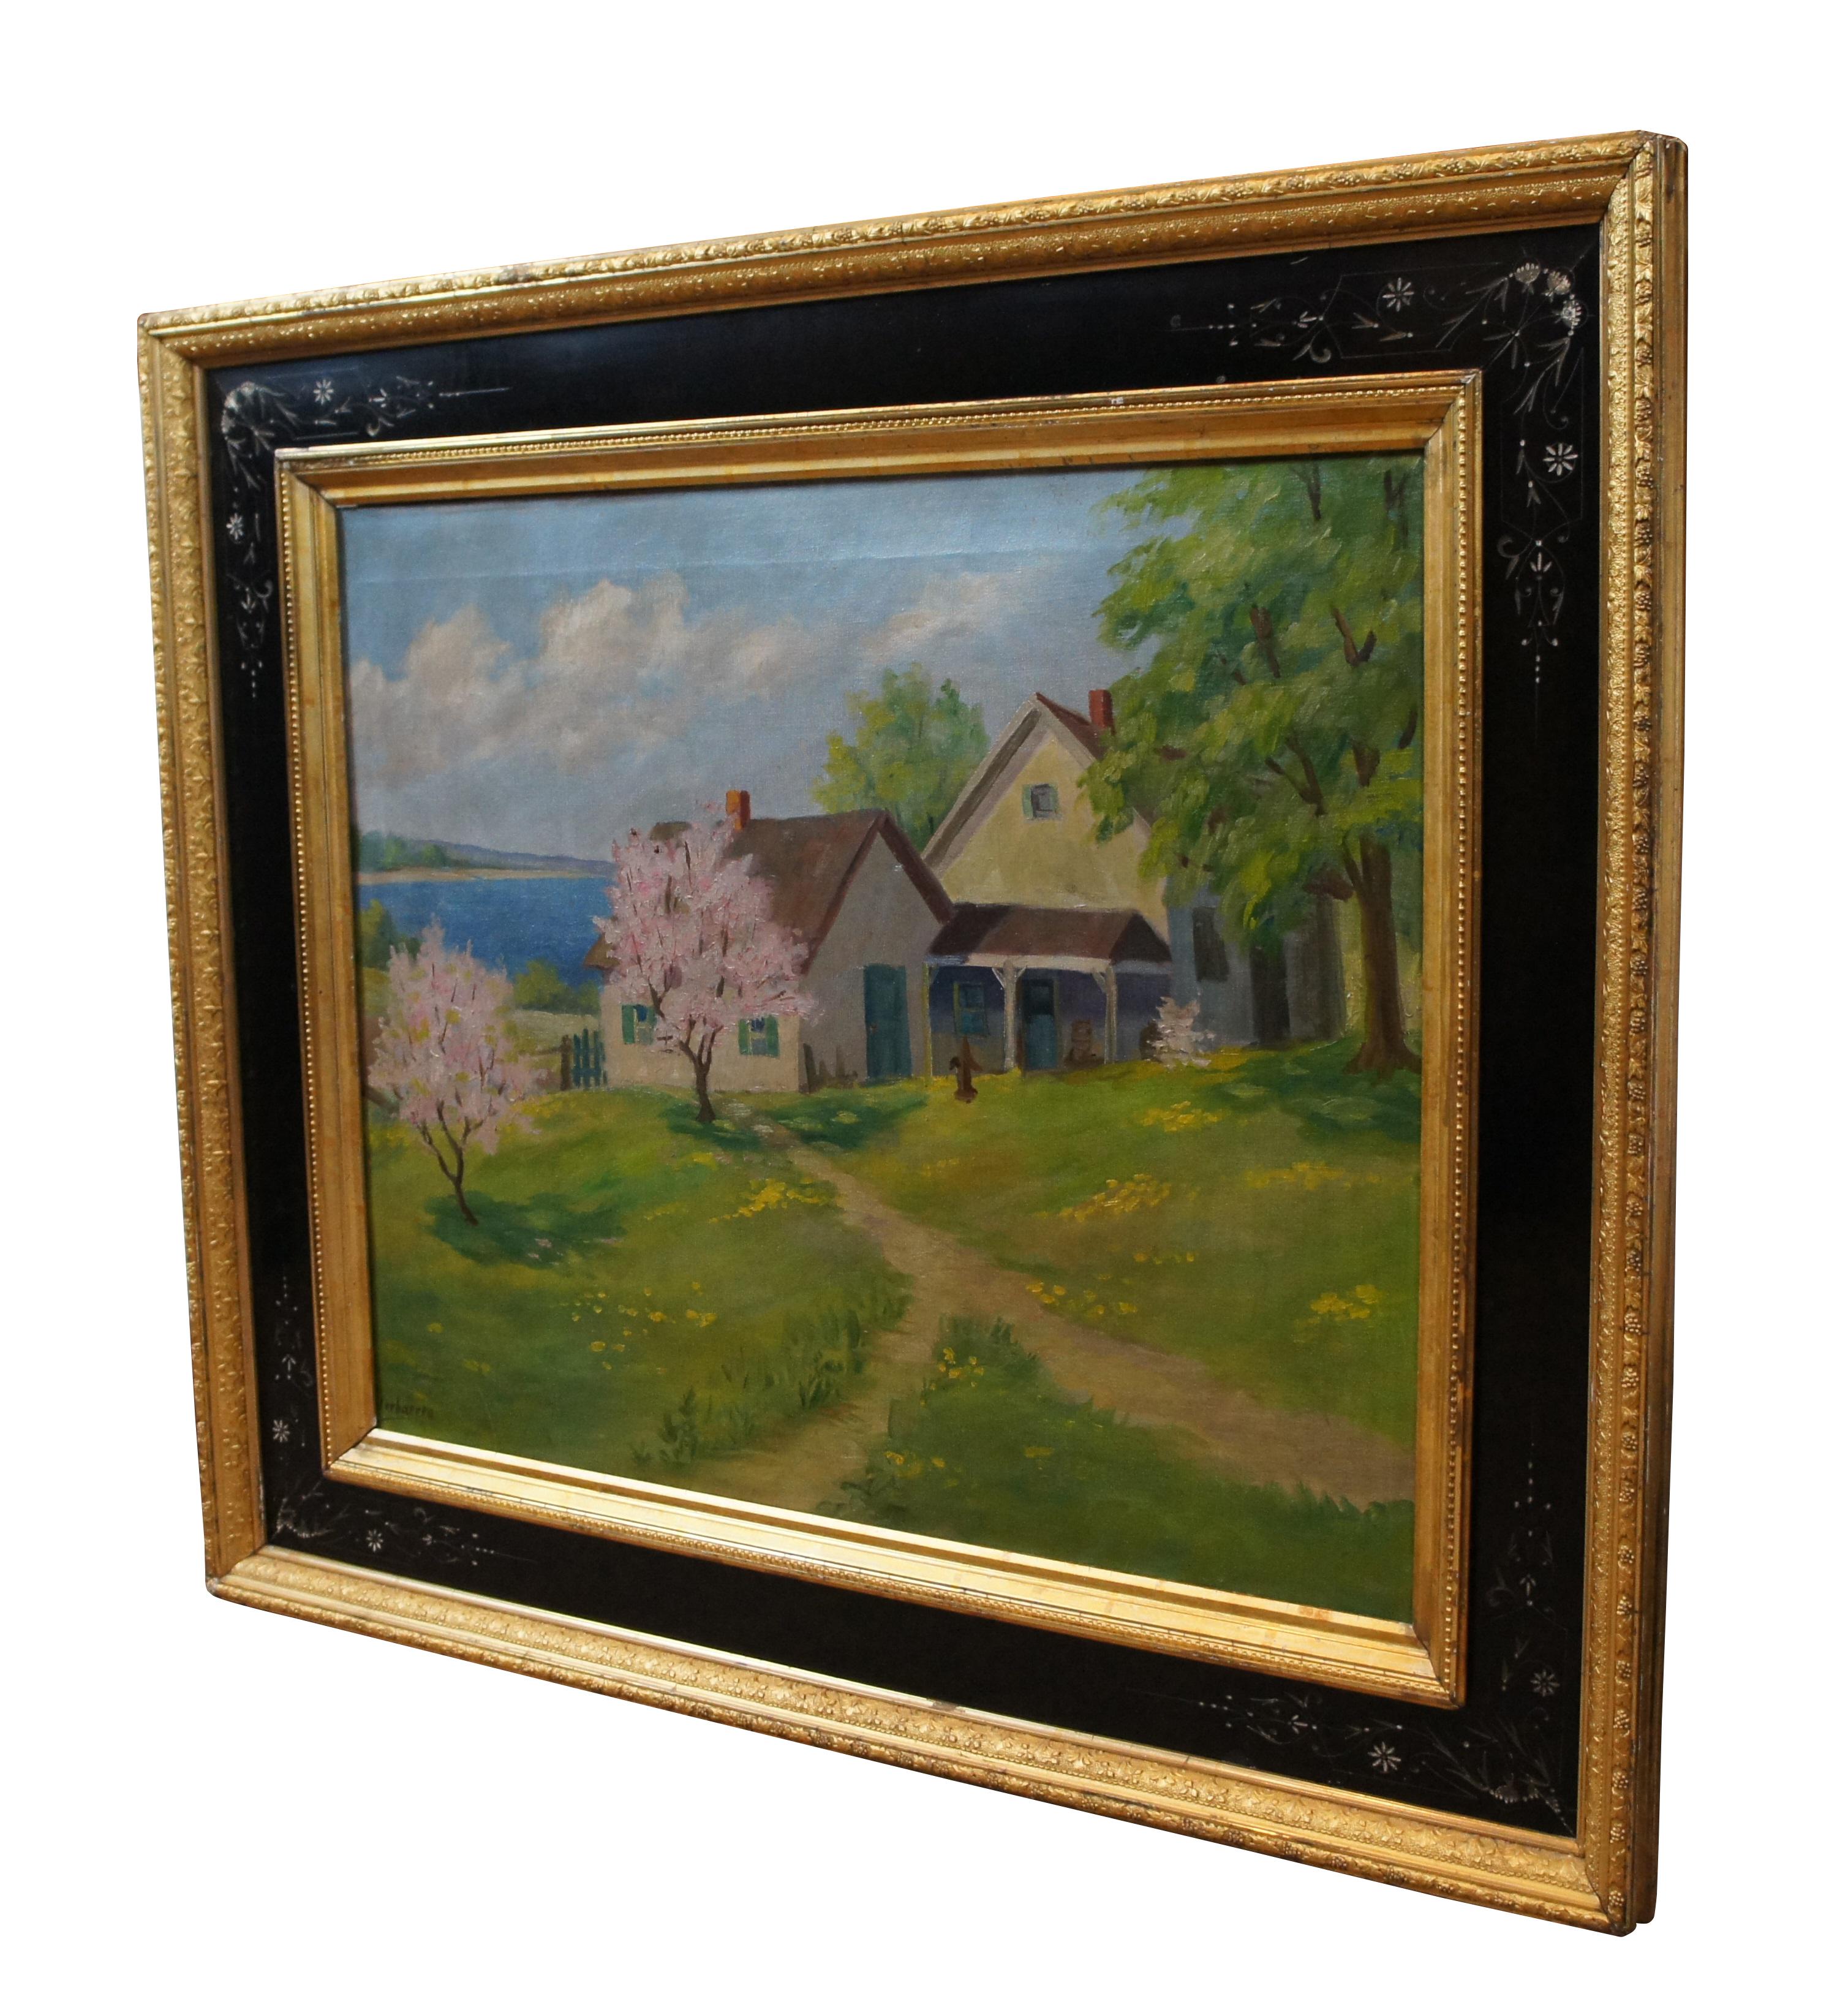 Vintage Carolus Verhaeren oil painting on canvas featuring a coast landscape scene with mountains, water and a house / cottage.  Framed Aethetic period gold gilt and ebonized frame.

Born in Antwerp, Belgium on June 18, 1908. Verhaeren was from a